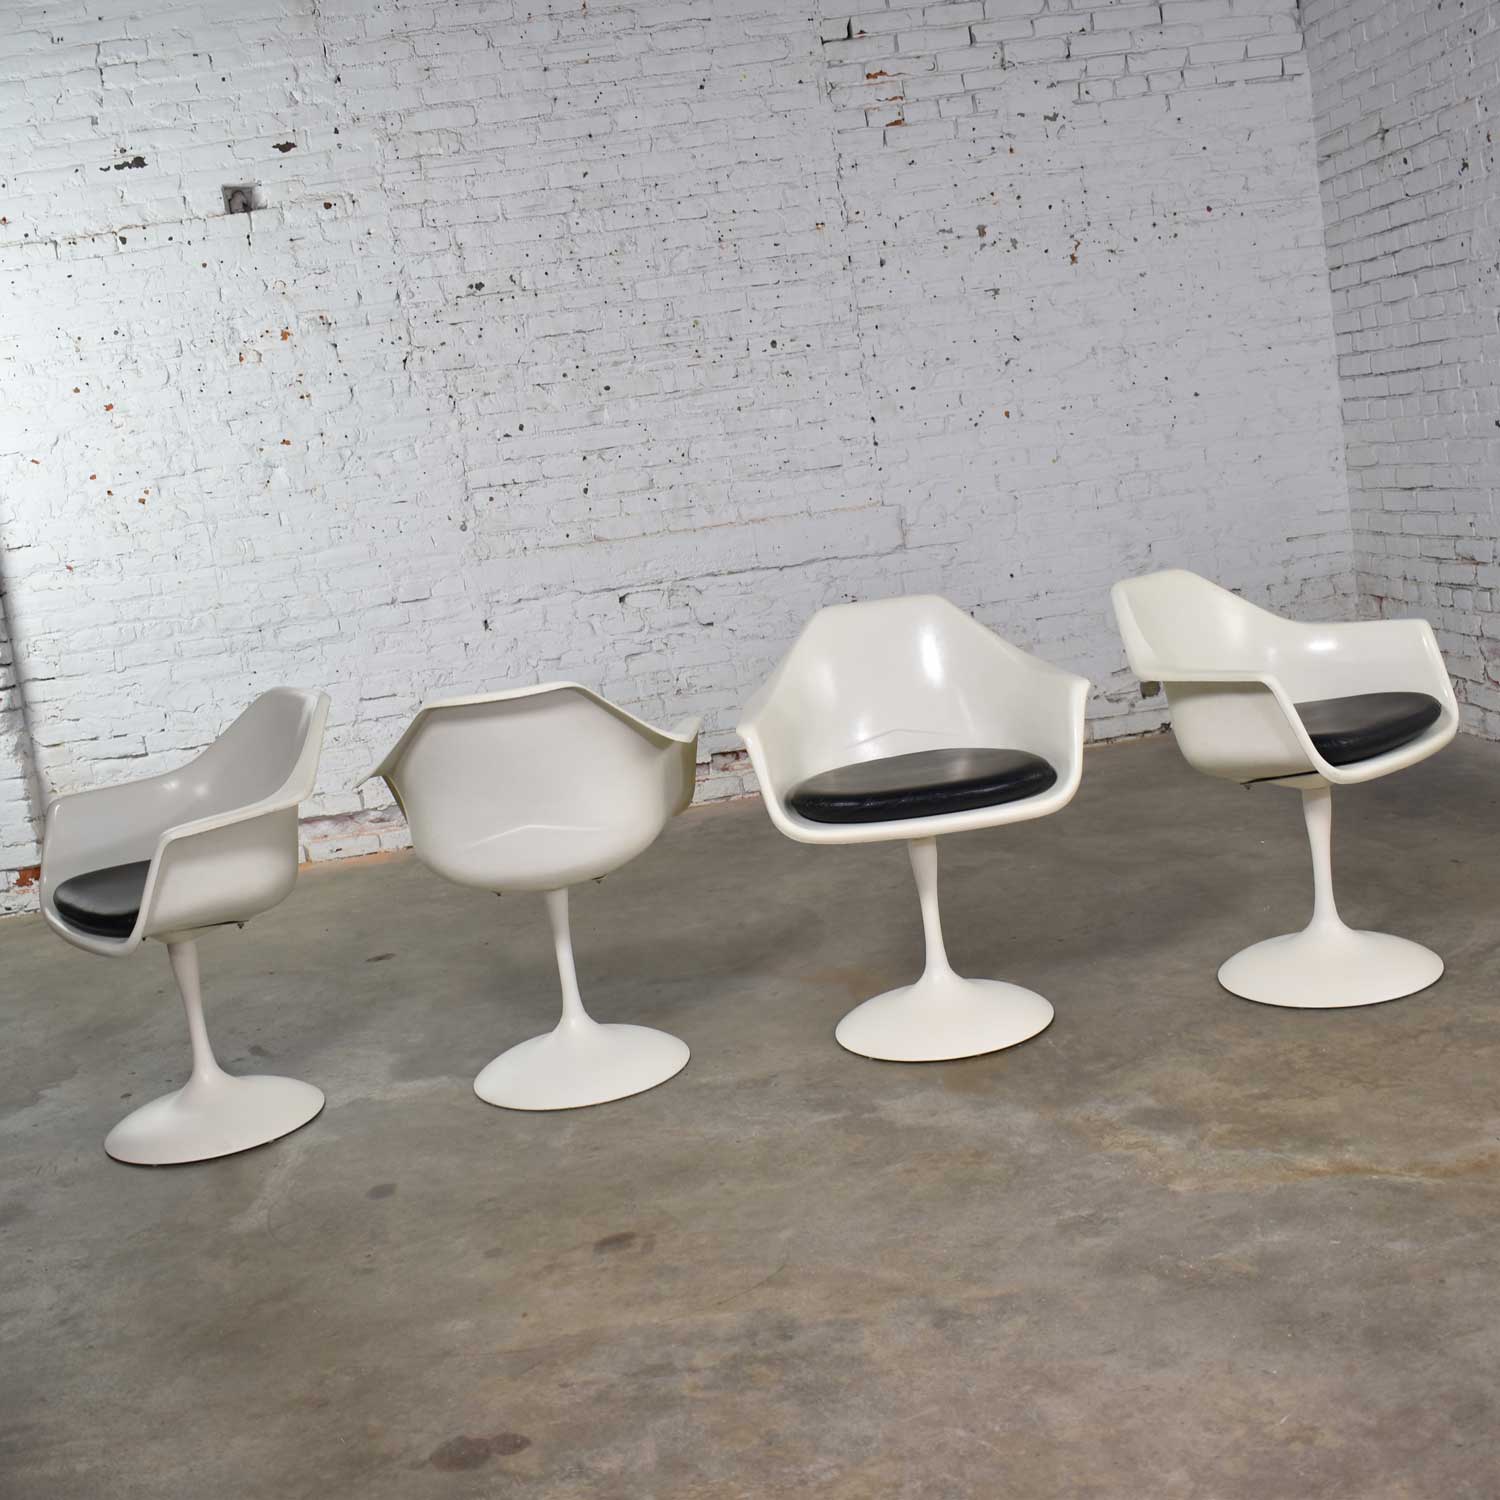 Tulip Style White Fiberglass Swivel Chairs and Table by Umanoff for Contemporary Shells